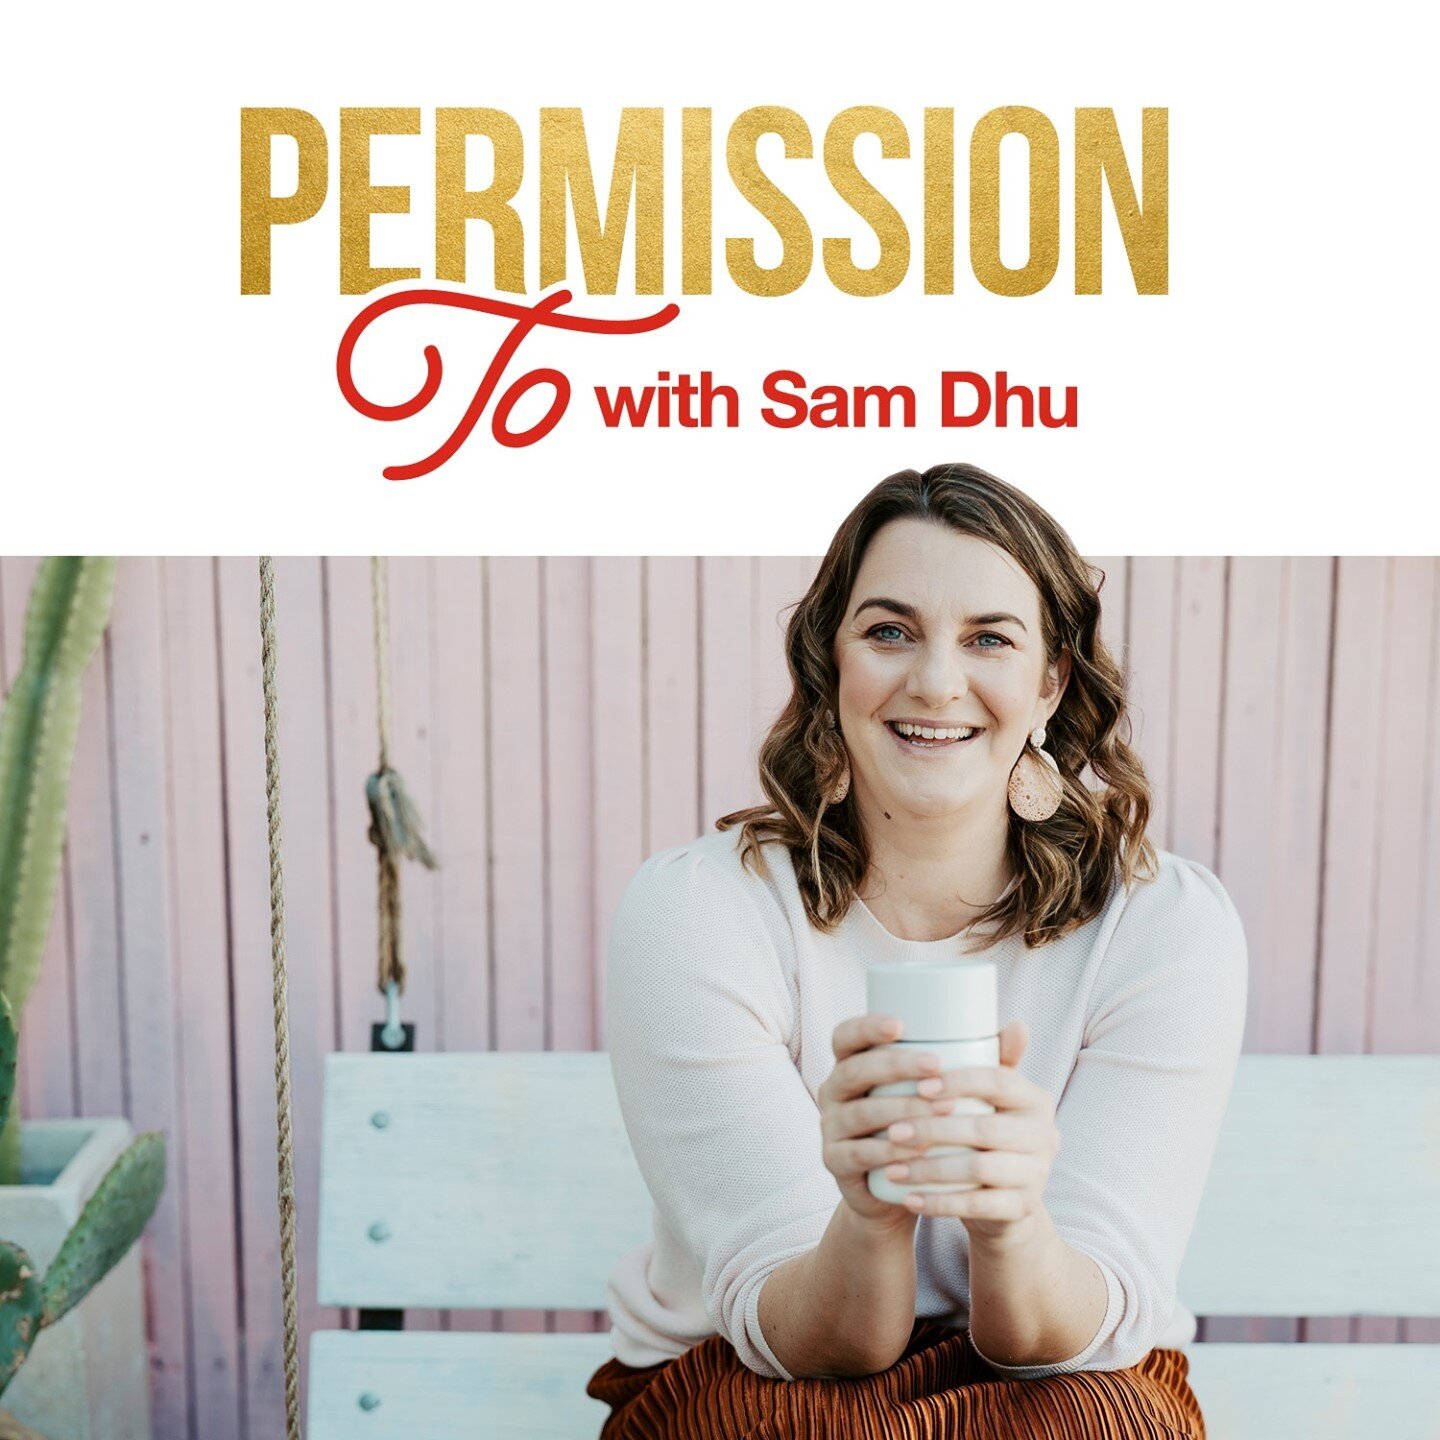 The day has arrived!⁠
⁠
Permission To with Samantha Dhu has been released into the world!⁠
⁠
In this podcast, I&rsquo;ll share with you parts of my life and stories that I have never shared on other platforms before.⁠
⁠
We&rsquo;ll dive into the scie